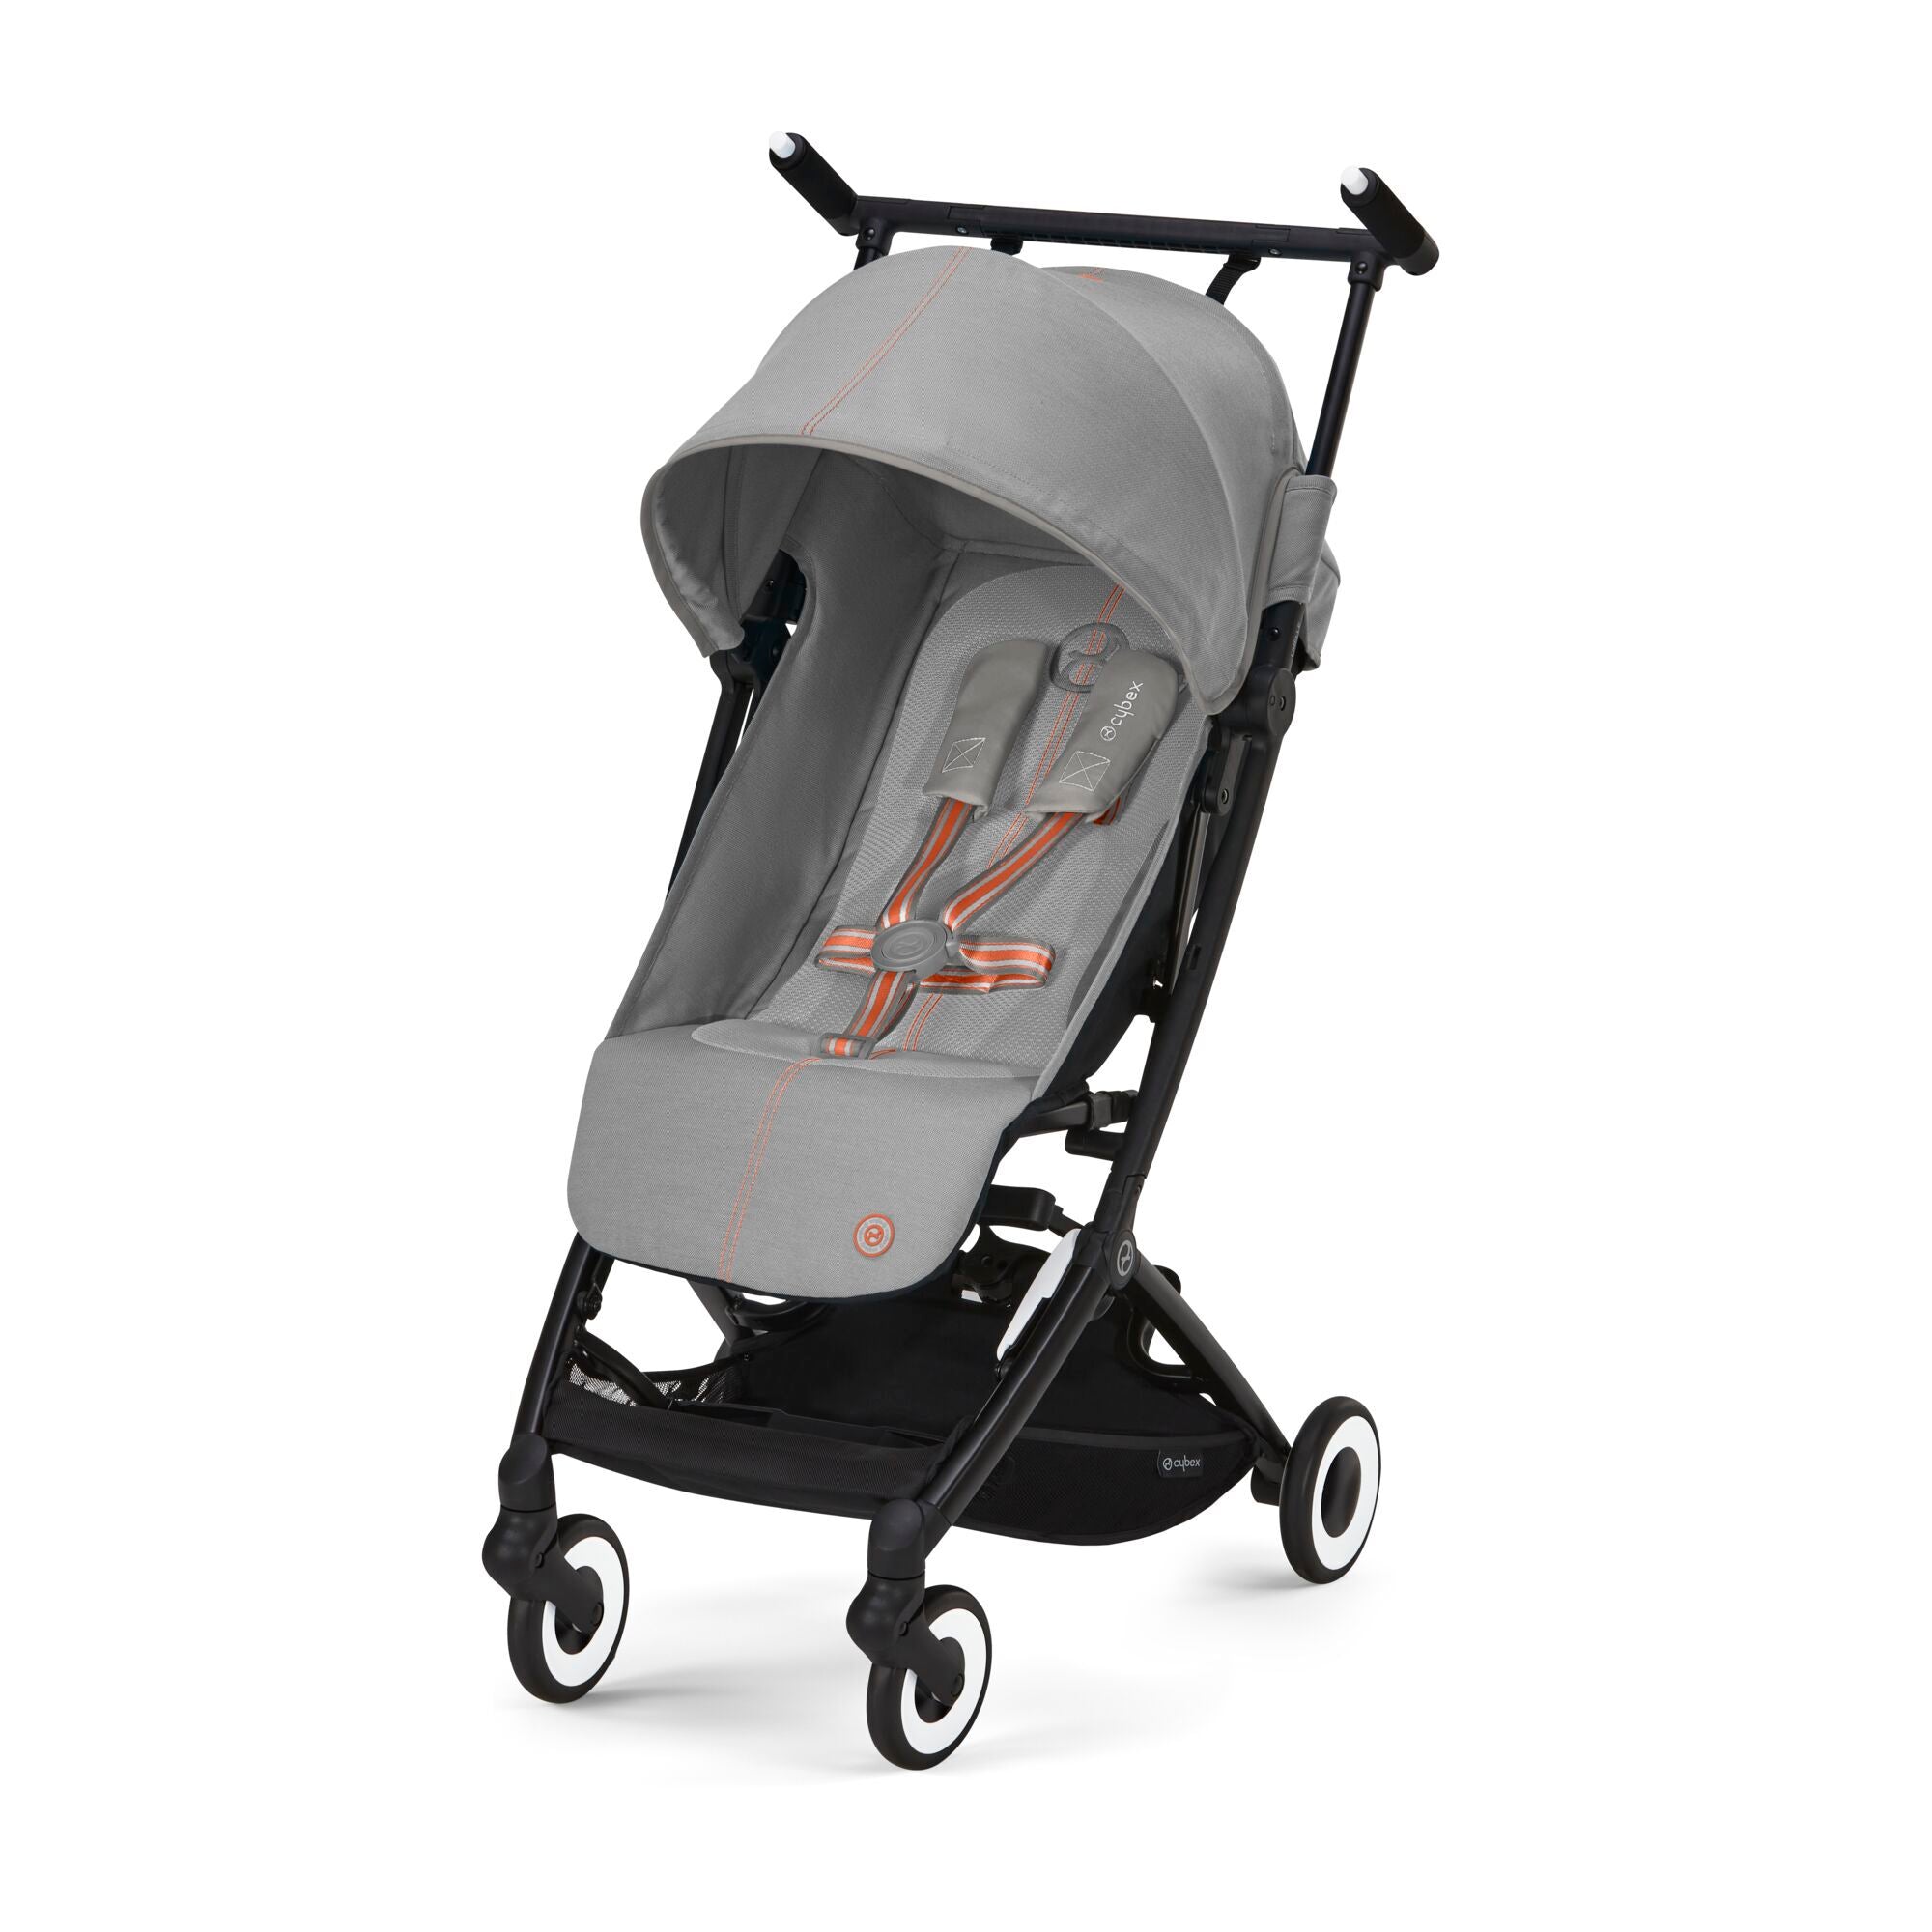 How to Attach the Car Seat I LIBELLE Buggy I CYBEX 